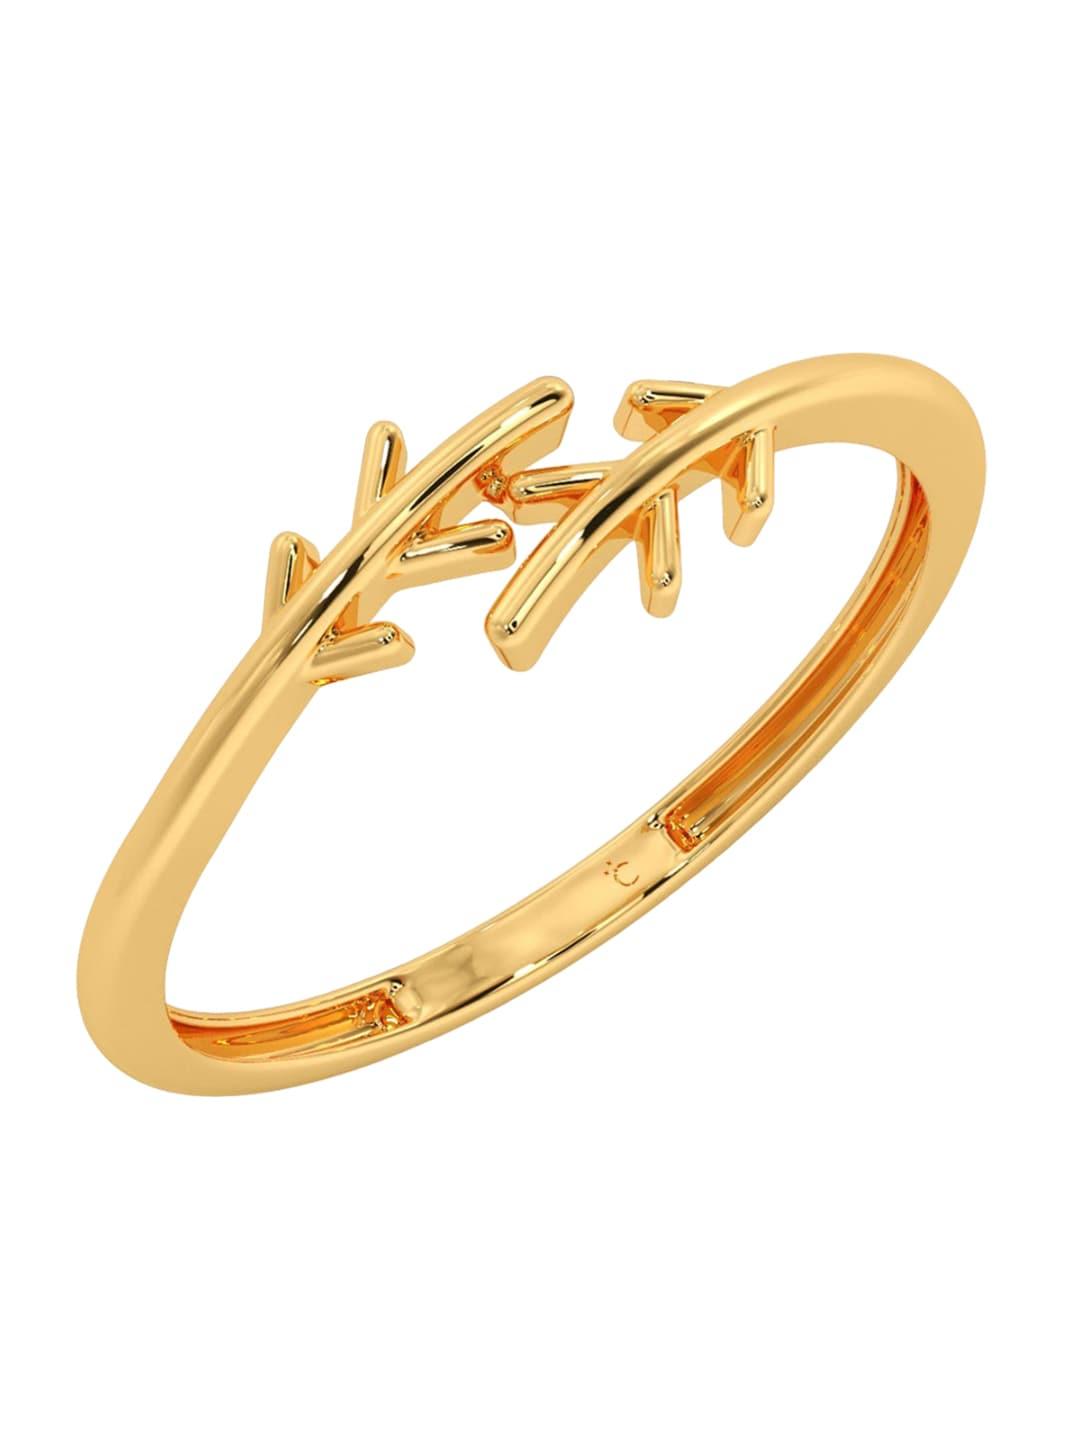 candere-a-kalyan-jewellers-company-18kt-gold-ring-0.89gm